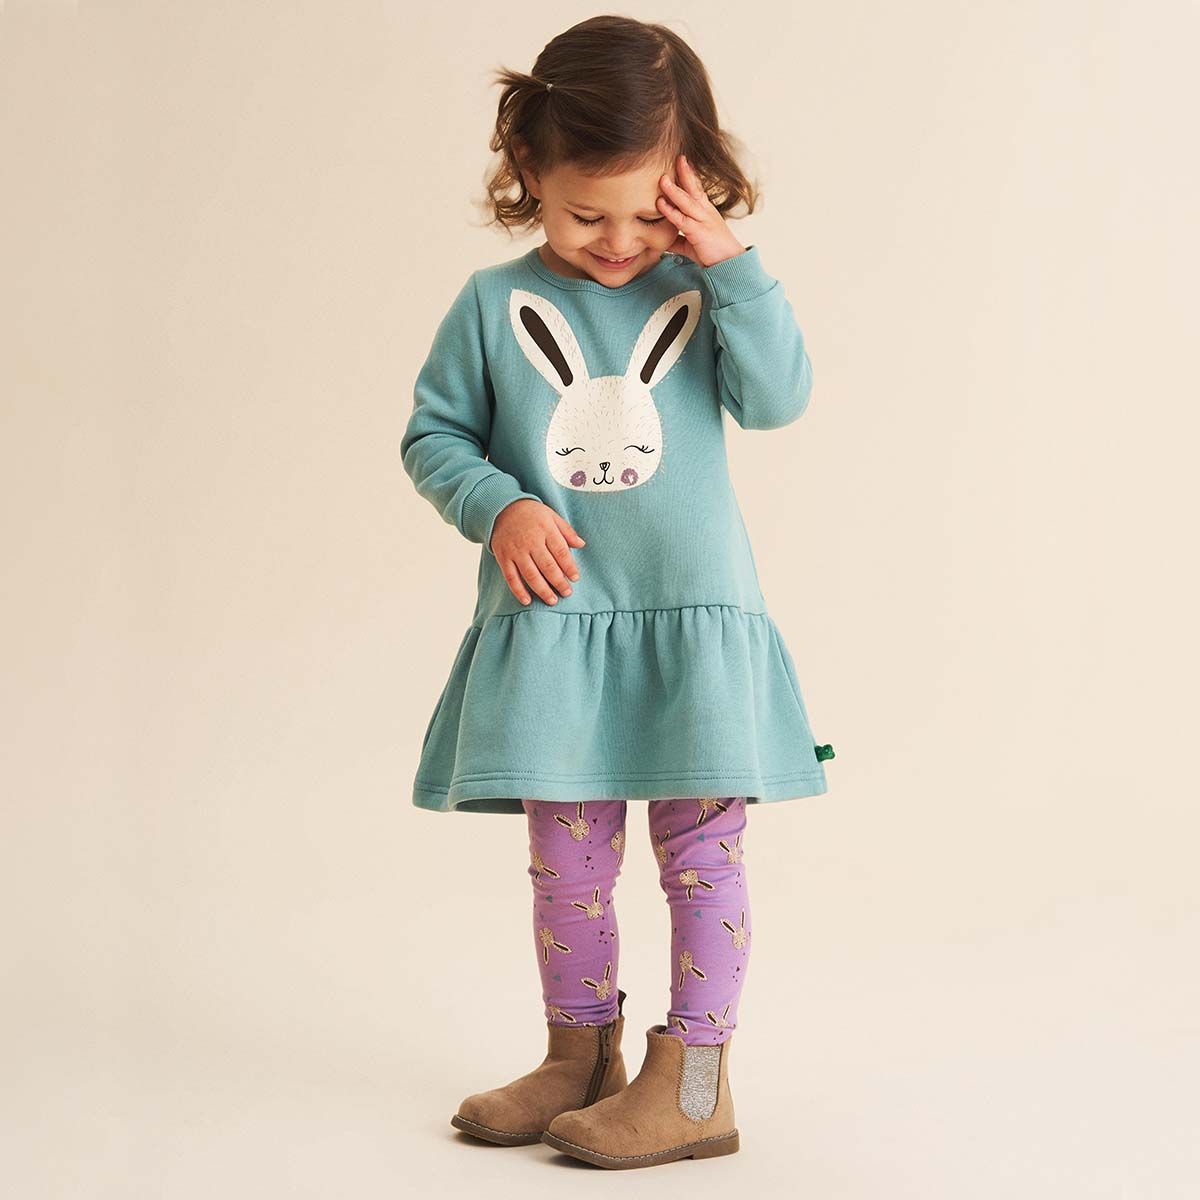 Kleid Hase ( 9-12 Monate)  Fred s World